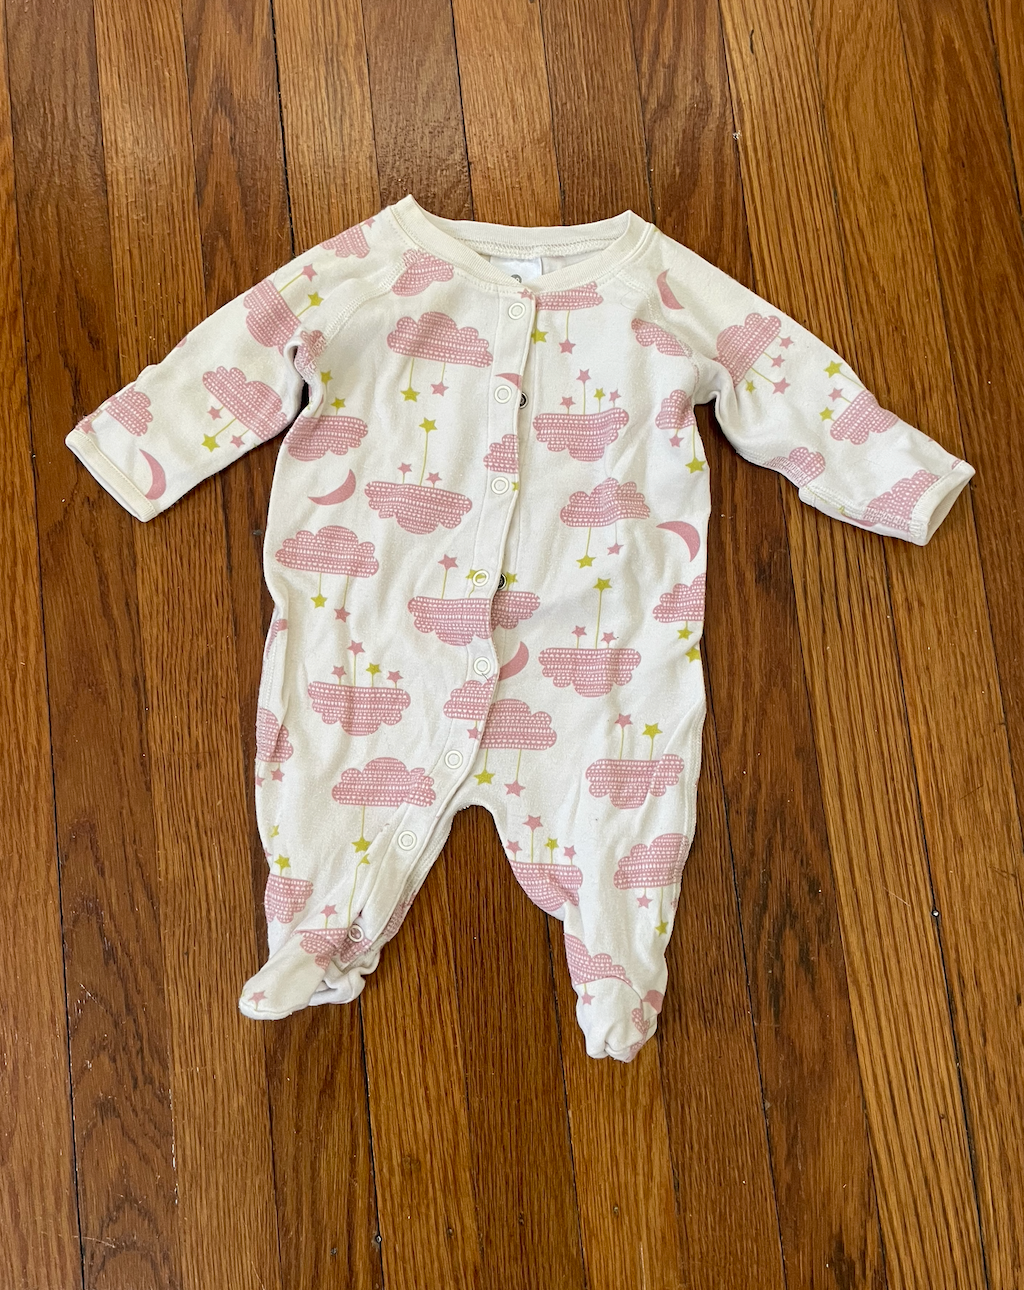 Hanna Andersson long sleeve sleeper - pink clouds - size 0-3 months